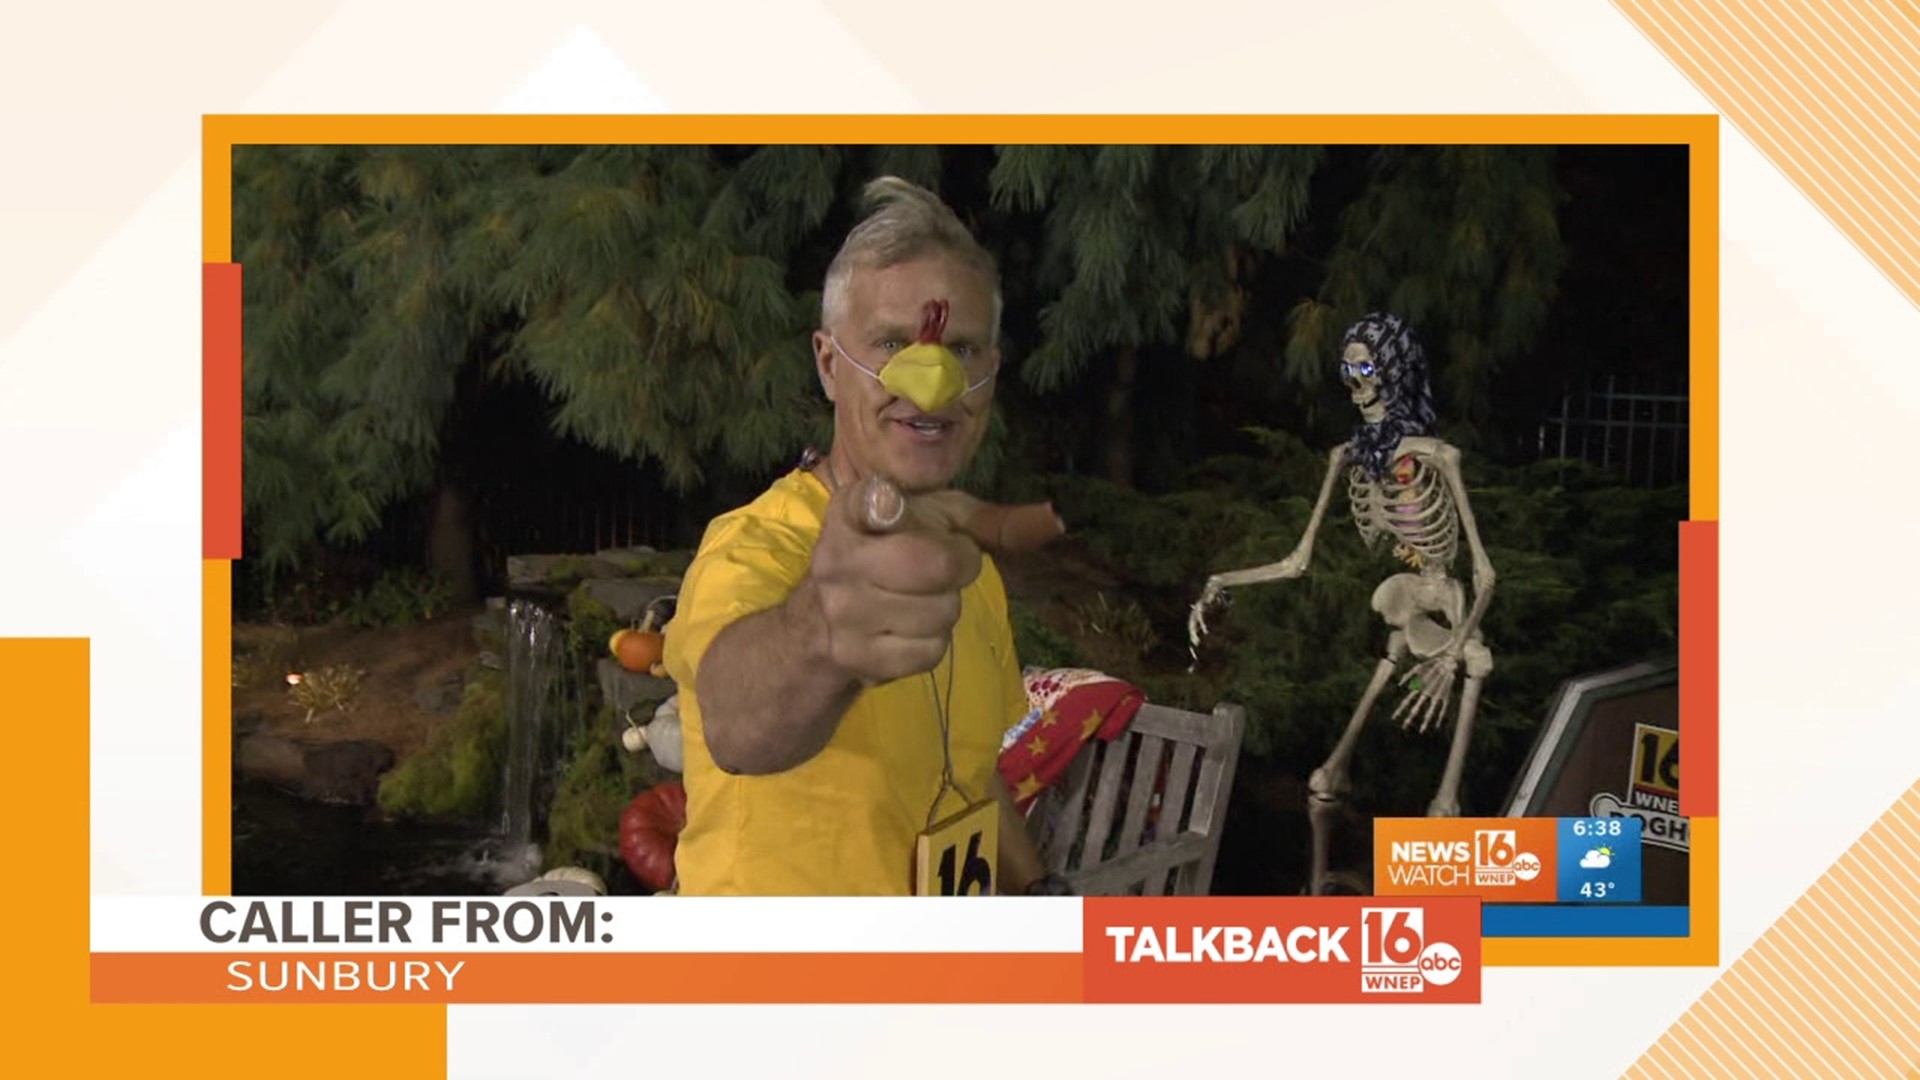 Callers are commenting on a variety of topics in this Halloween Talkback 16.